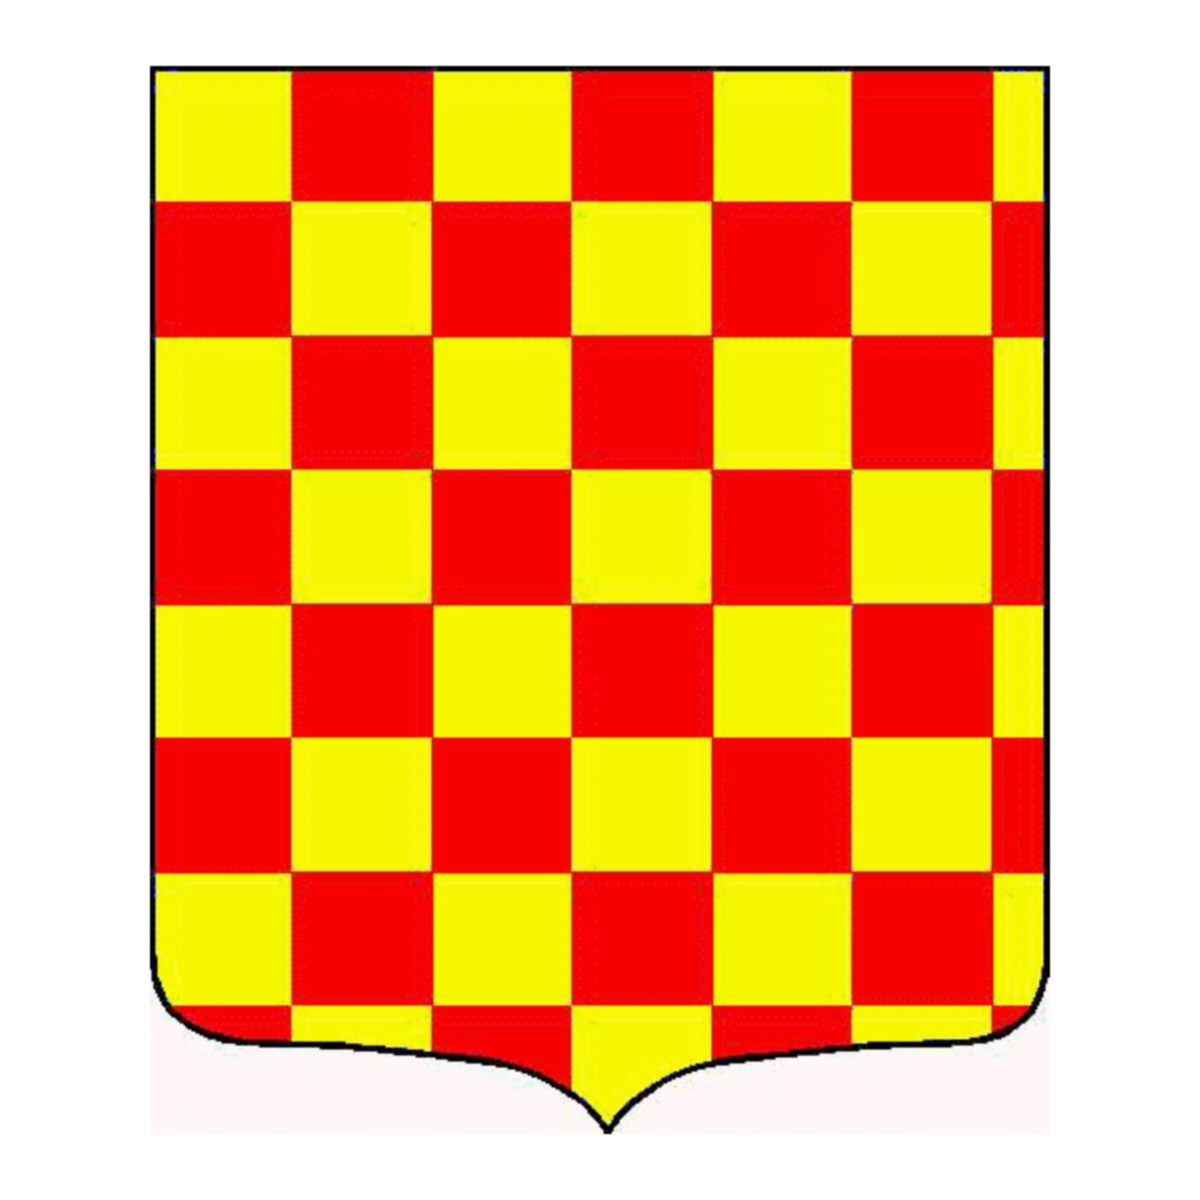 Coat of arms of family Ferber